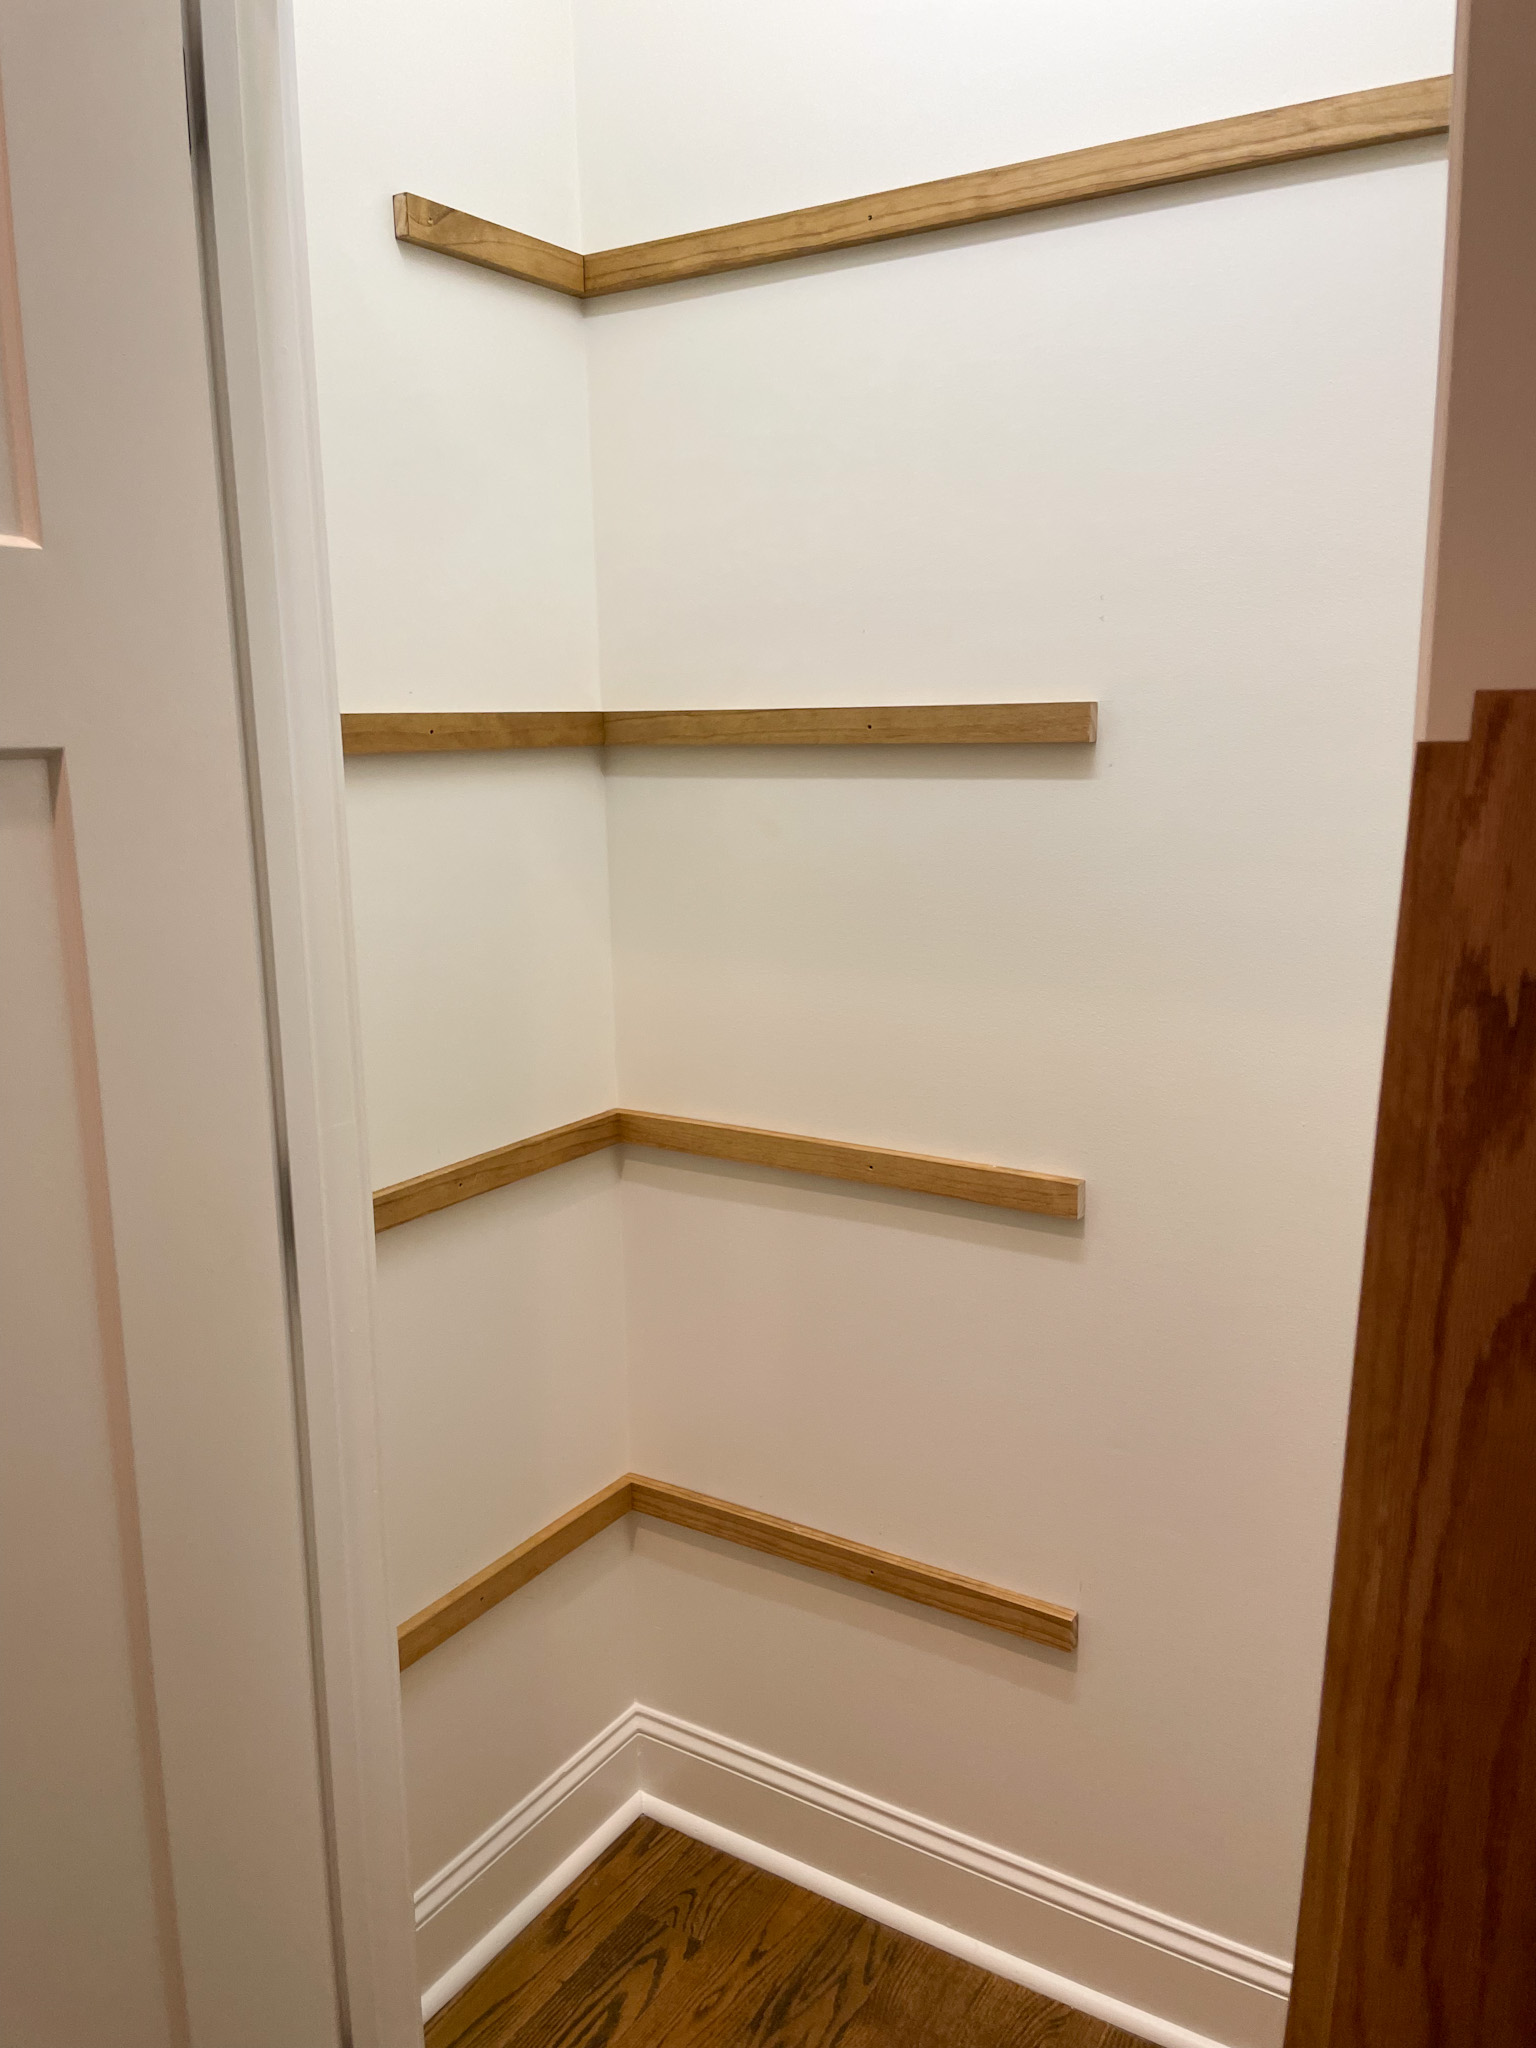 wood braces on wall in closet